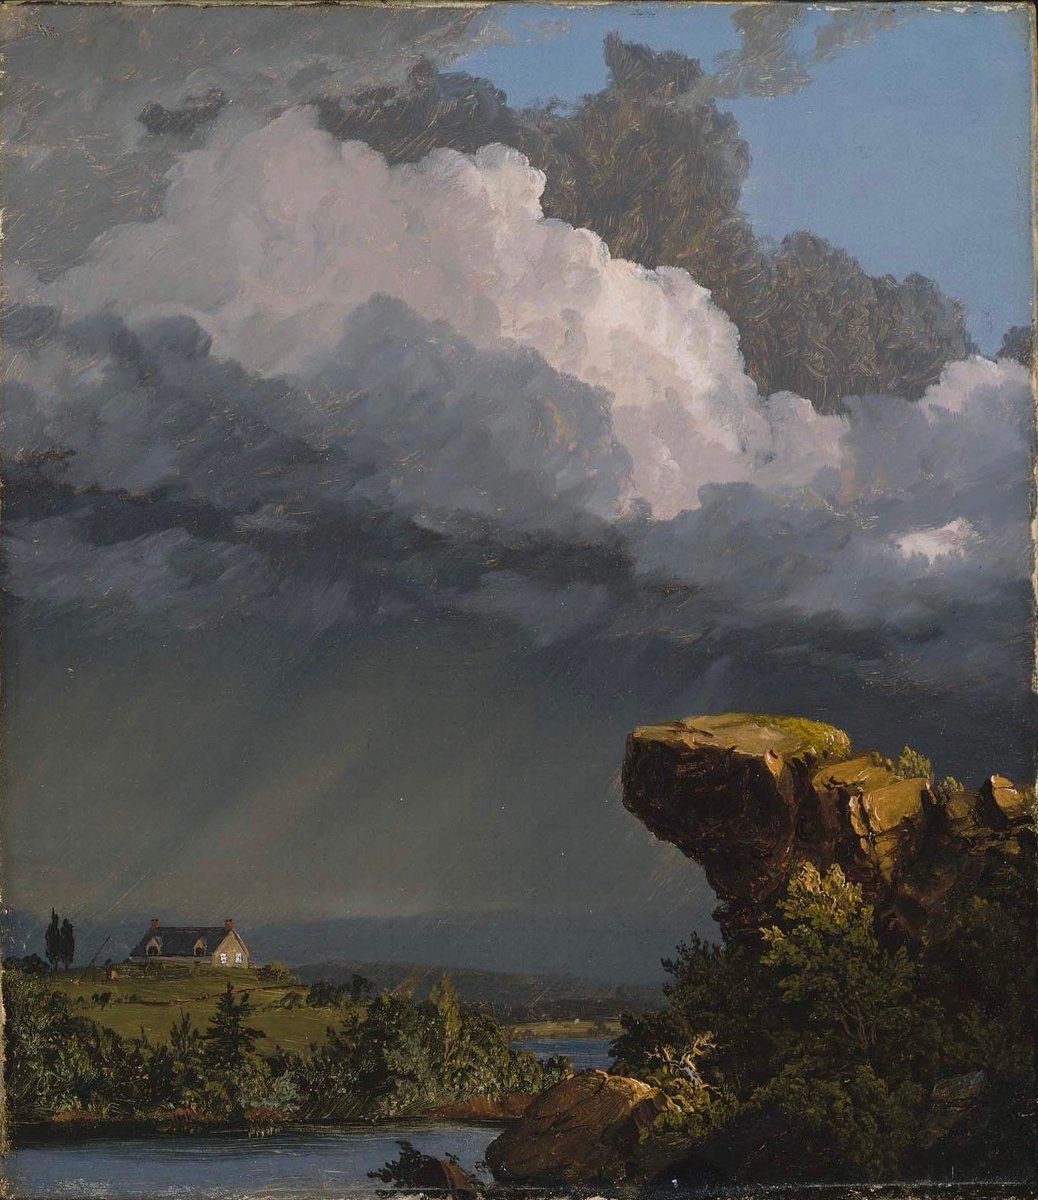 His artwork, celebrated for capturing expansive vistas of mountains, waterfalls, and sun-drenched sunsets, was marked by an extraordinary commitment to detail and an evocative use of light📘➡️📲 getdailyart.com
🏛 @mfaboston
 A Passing Storm Frederic Edwin Church 1849